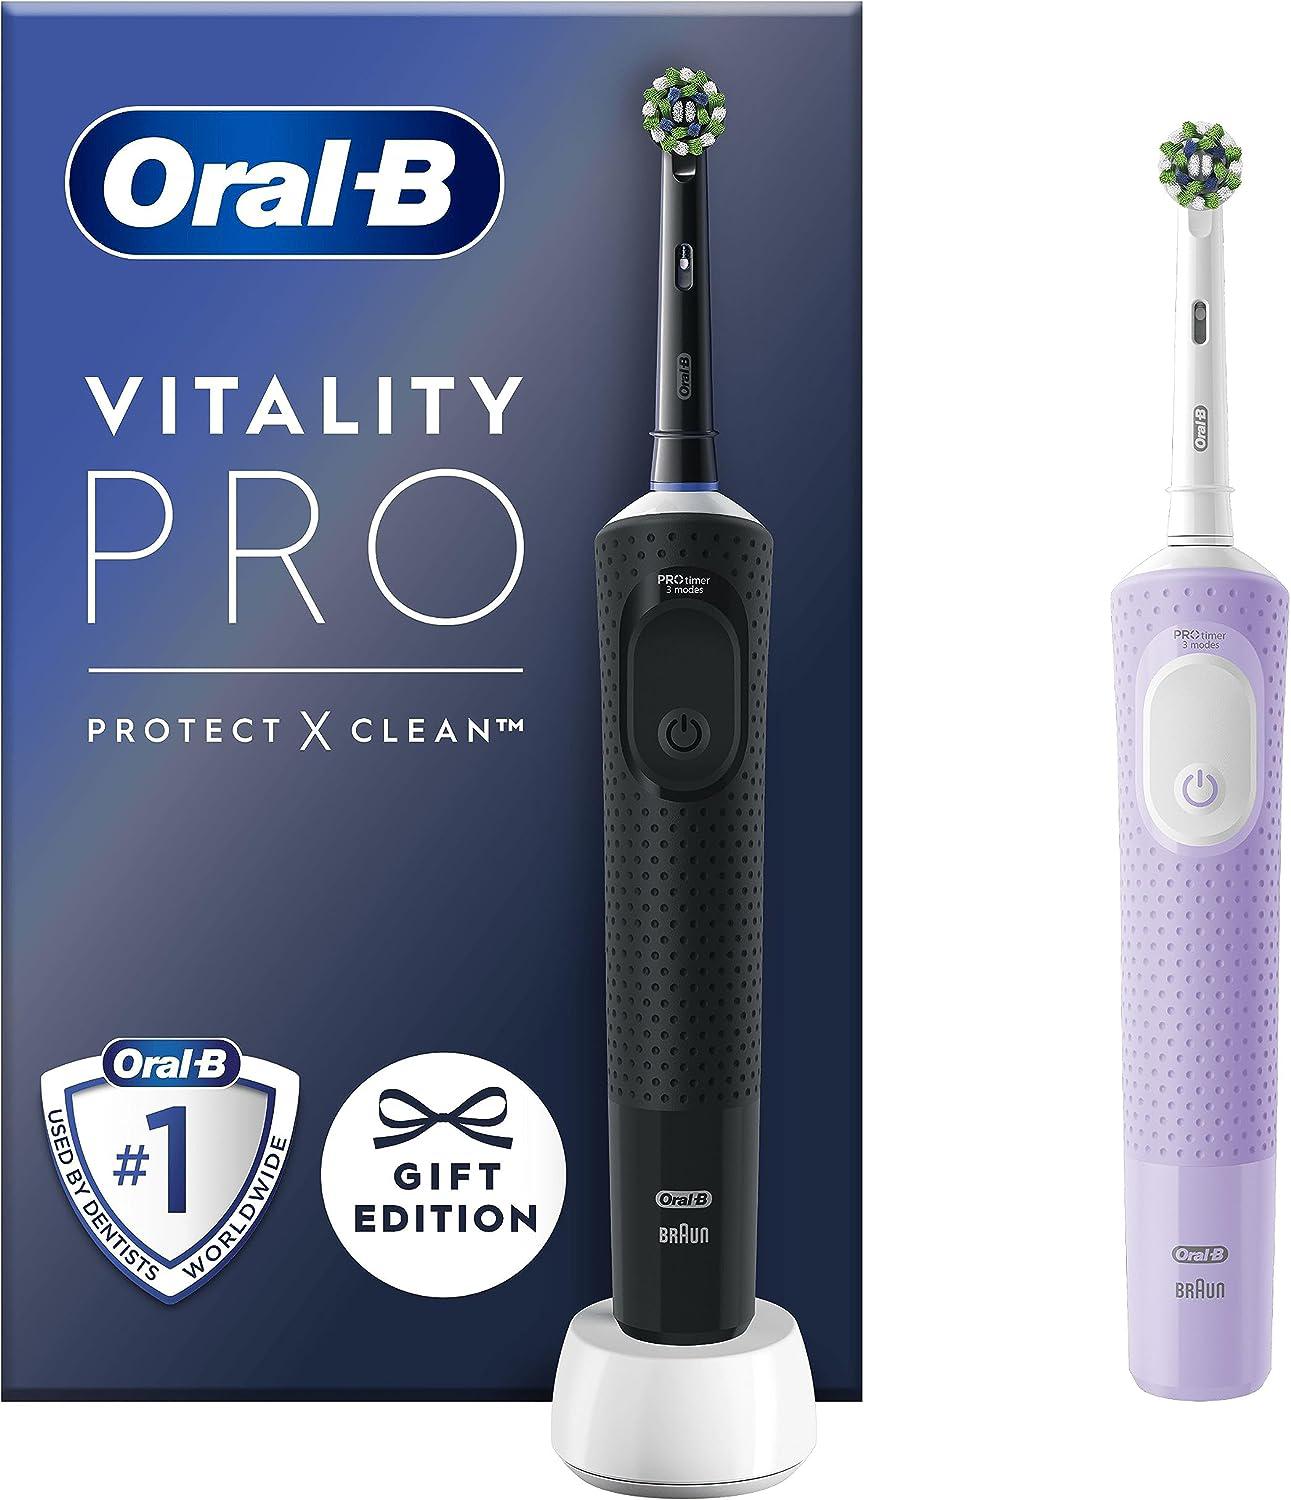 Oral-B Vitality Pro 2 x Electric Toothbrushes, 2 Toothbrush Heads, 3 Brushing Modes Including Sensitive Plus - Black & Purple